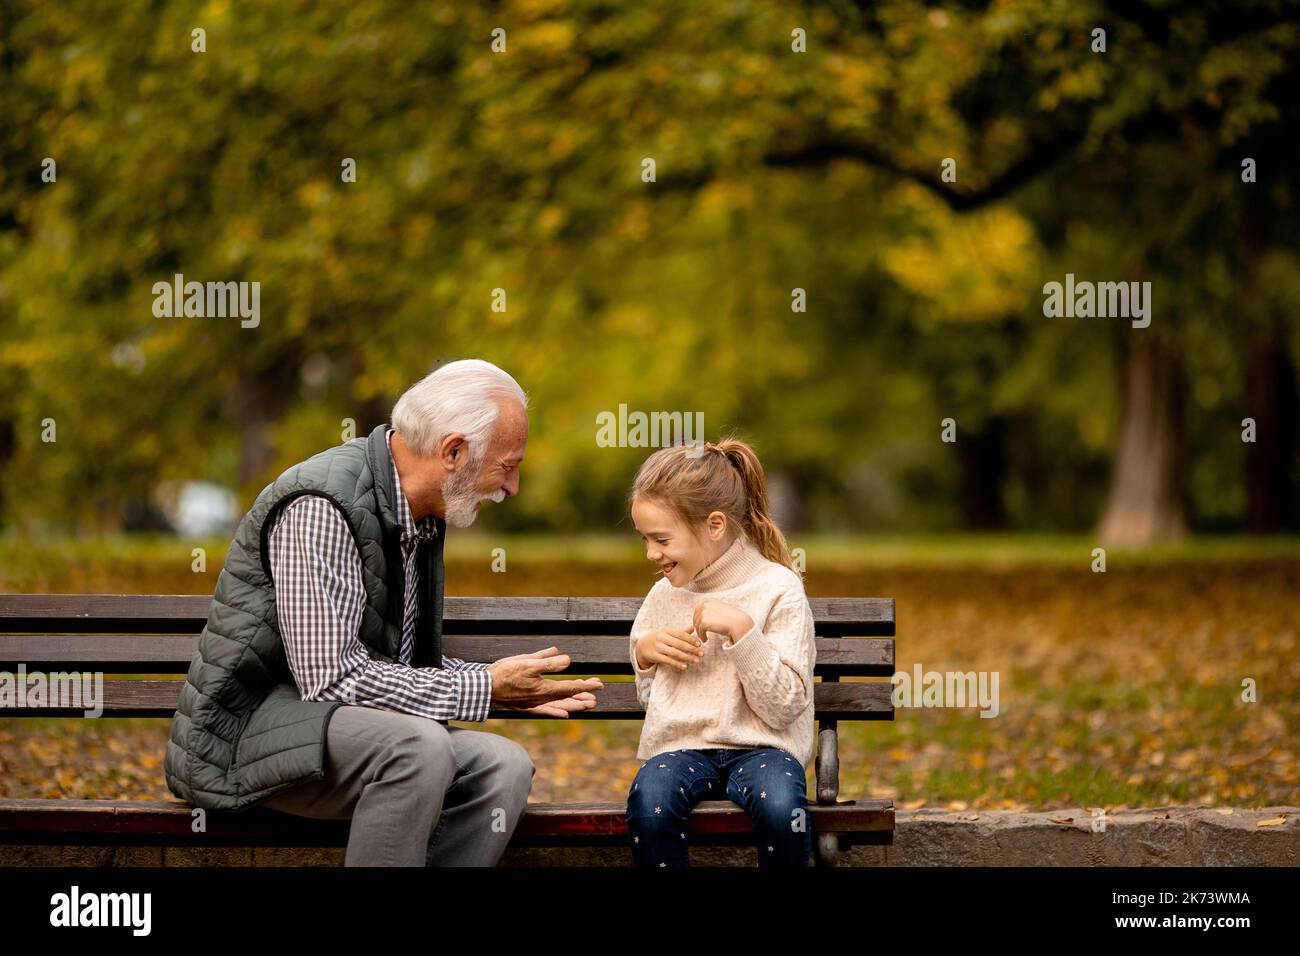 Handsome grandfather playing red hands slapping game with his granddaughter in park on autumn day Stock Photo